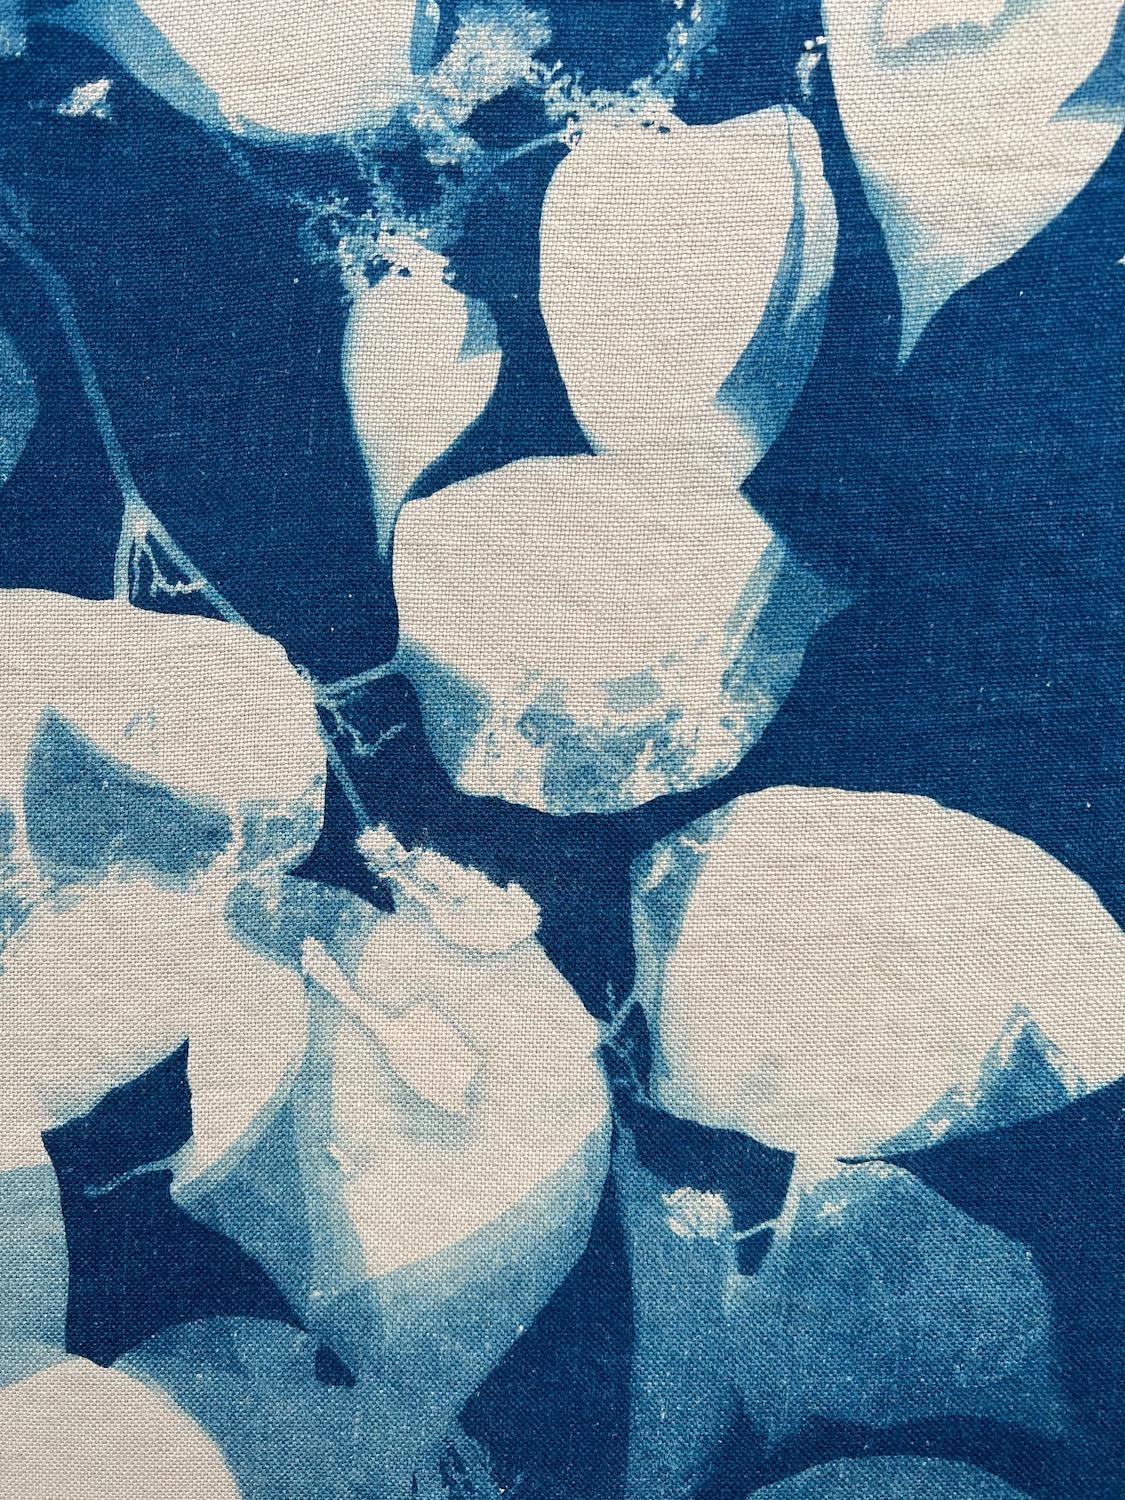 Marie Craig's 'Knotweed’ is an original deep blue photograph of leaves and branches of the Japanese Knotweed plant. This piece was created using cyanotype, an early photographic process which uses sunlight to expose specially treated linen,